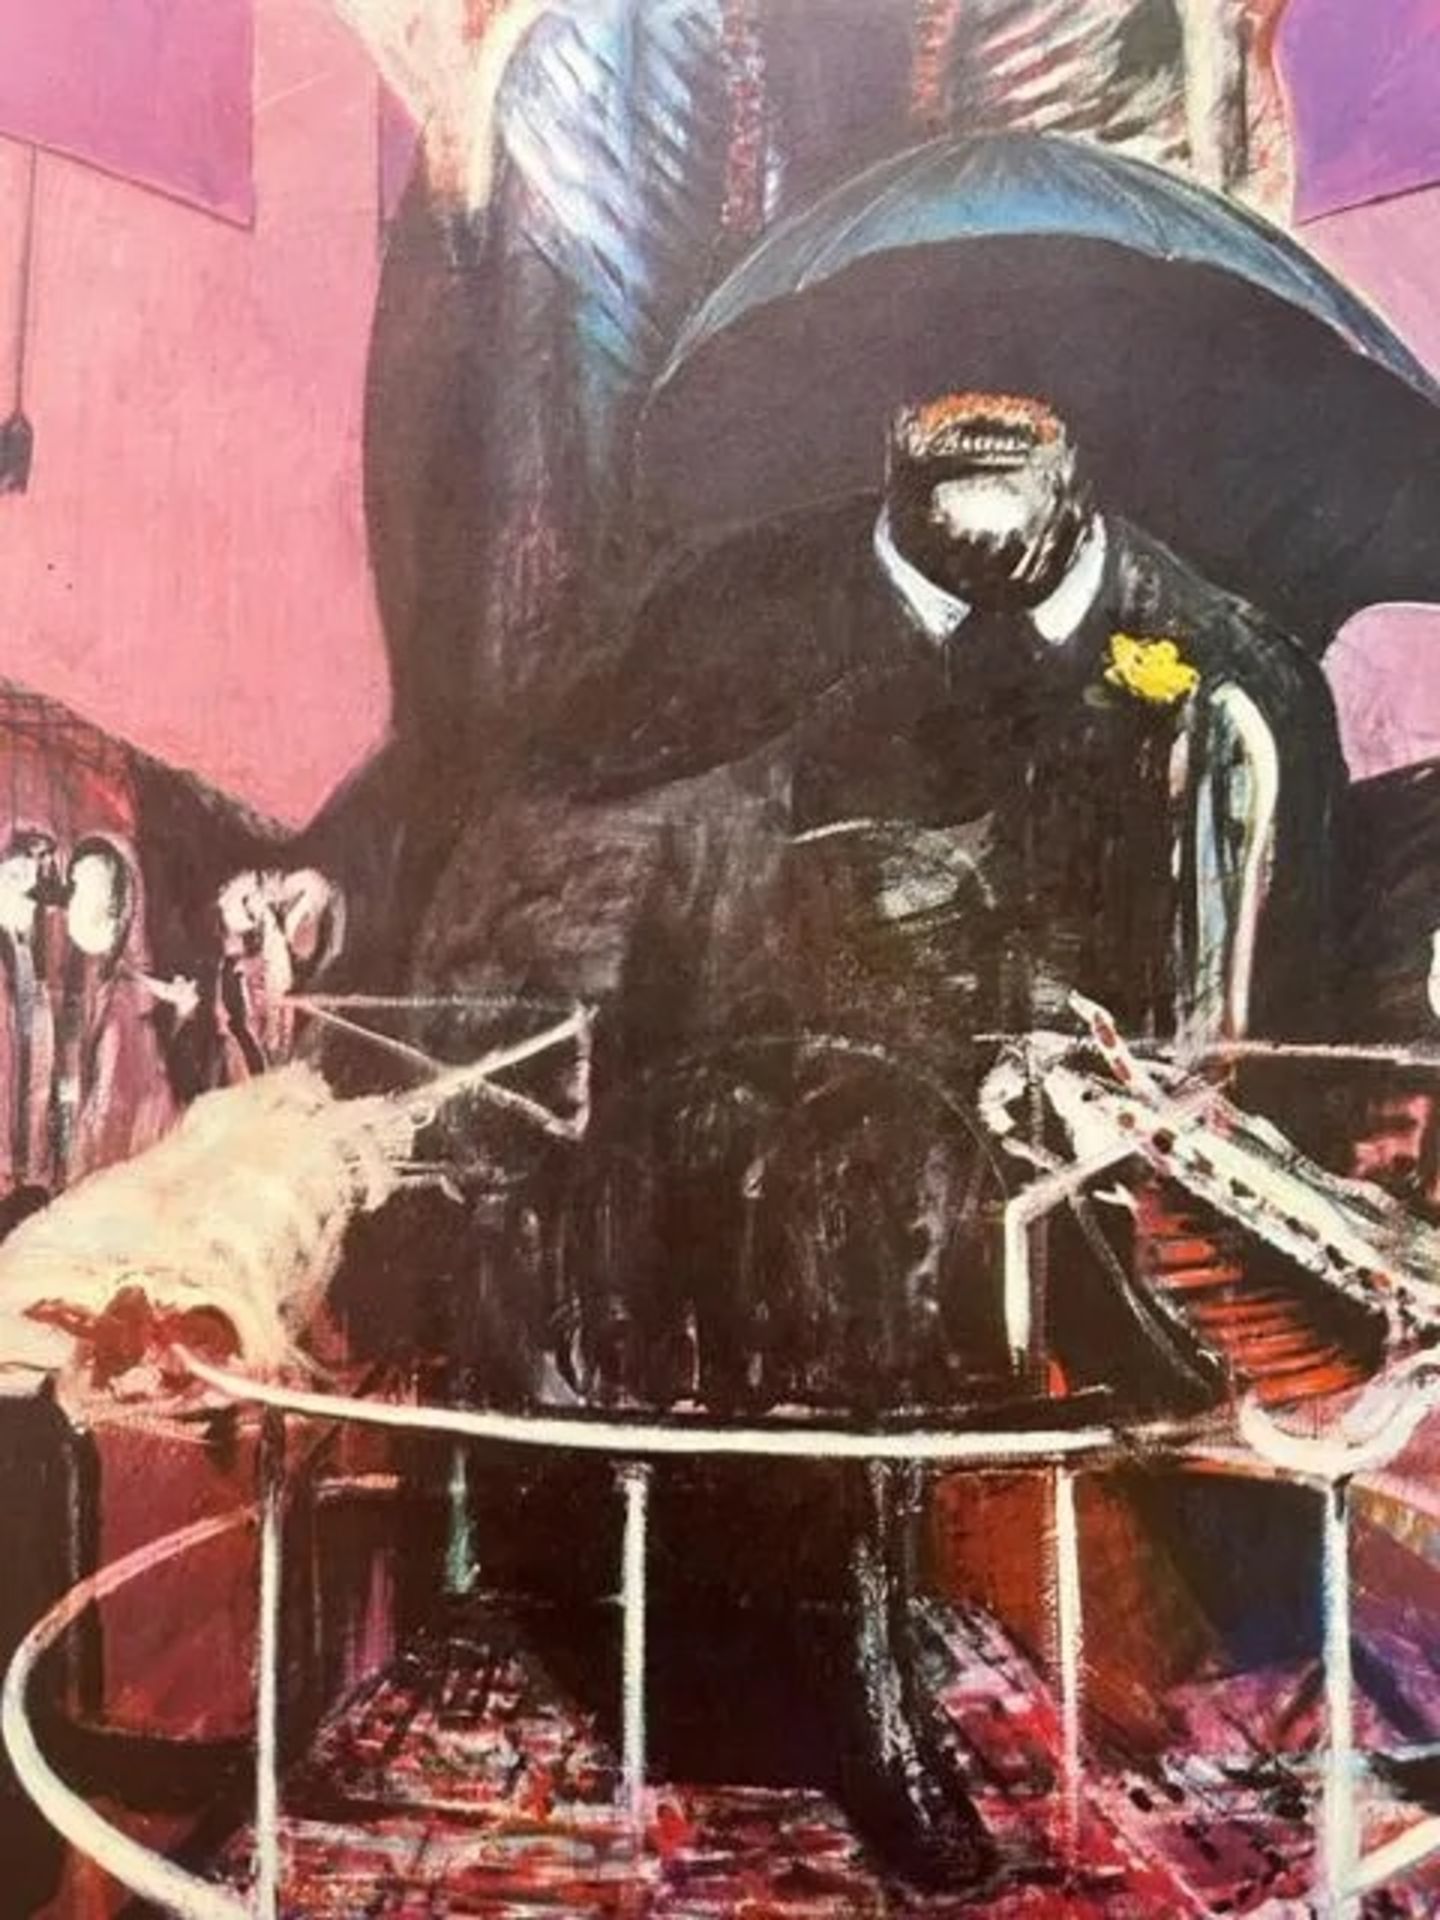 Francis Bacon "Pink Crucifiction" Print - Image 4 of 6